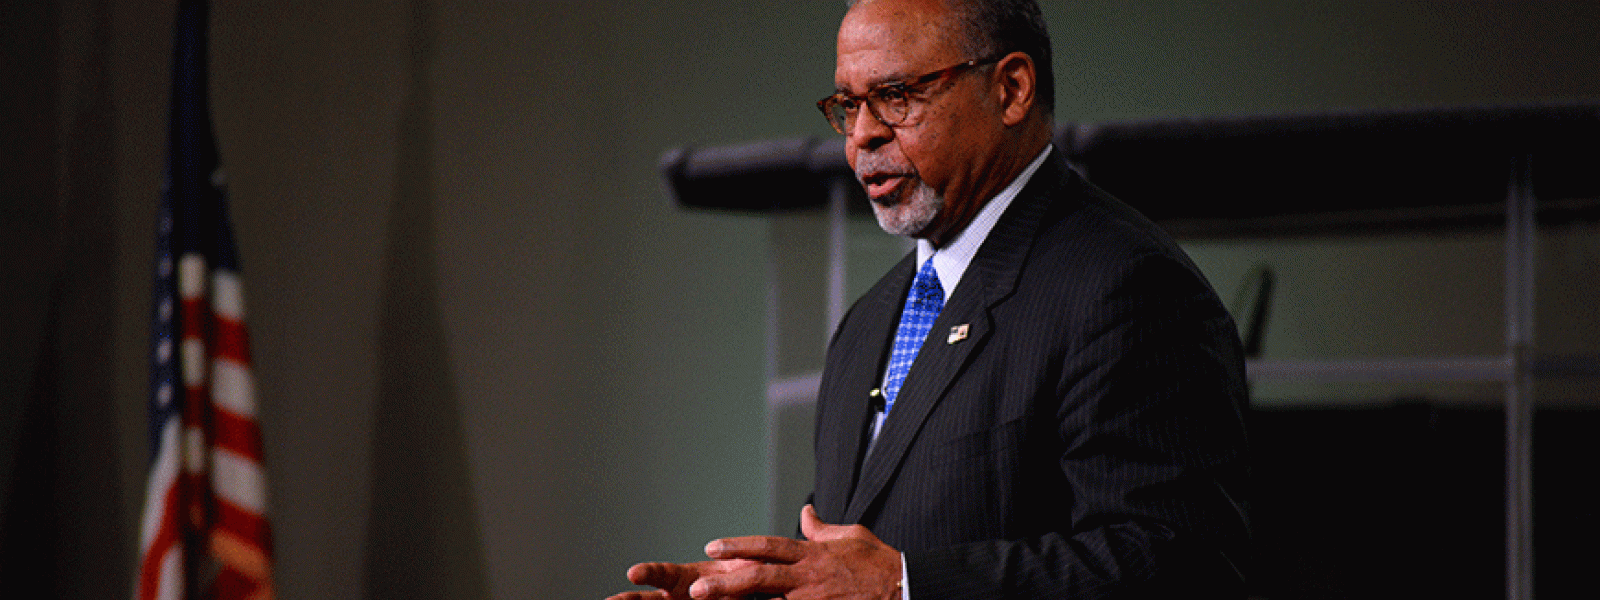 Dr. Ken Blackwell of the Family Research Council speaks to CIU students.  